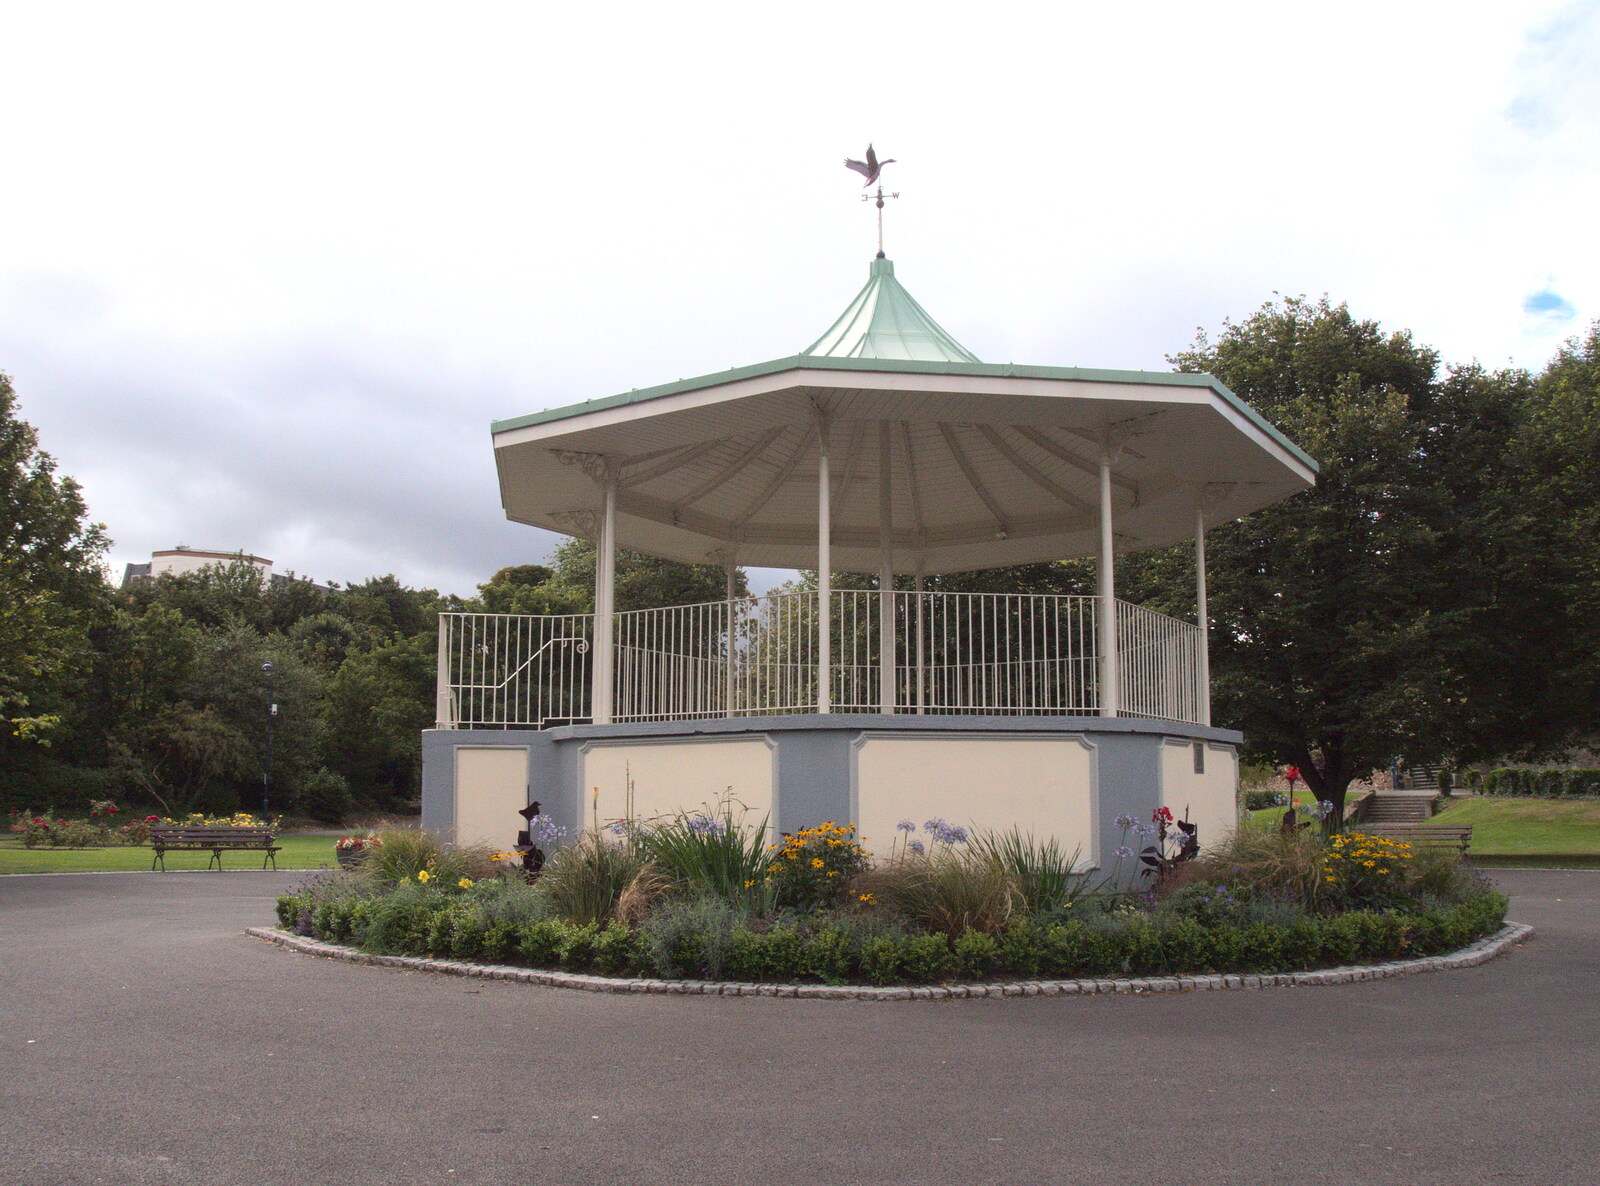 The Blackrock Park band stand from Fire and Water: The Burning of the Blackrock Centre, County Dublin, Ireland - 12th August 2017